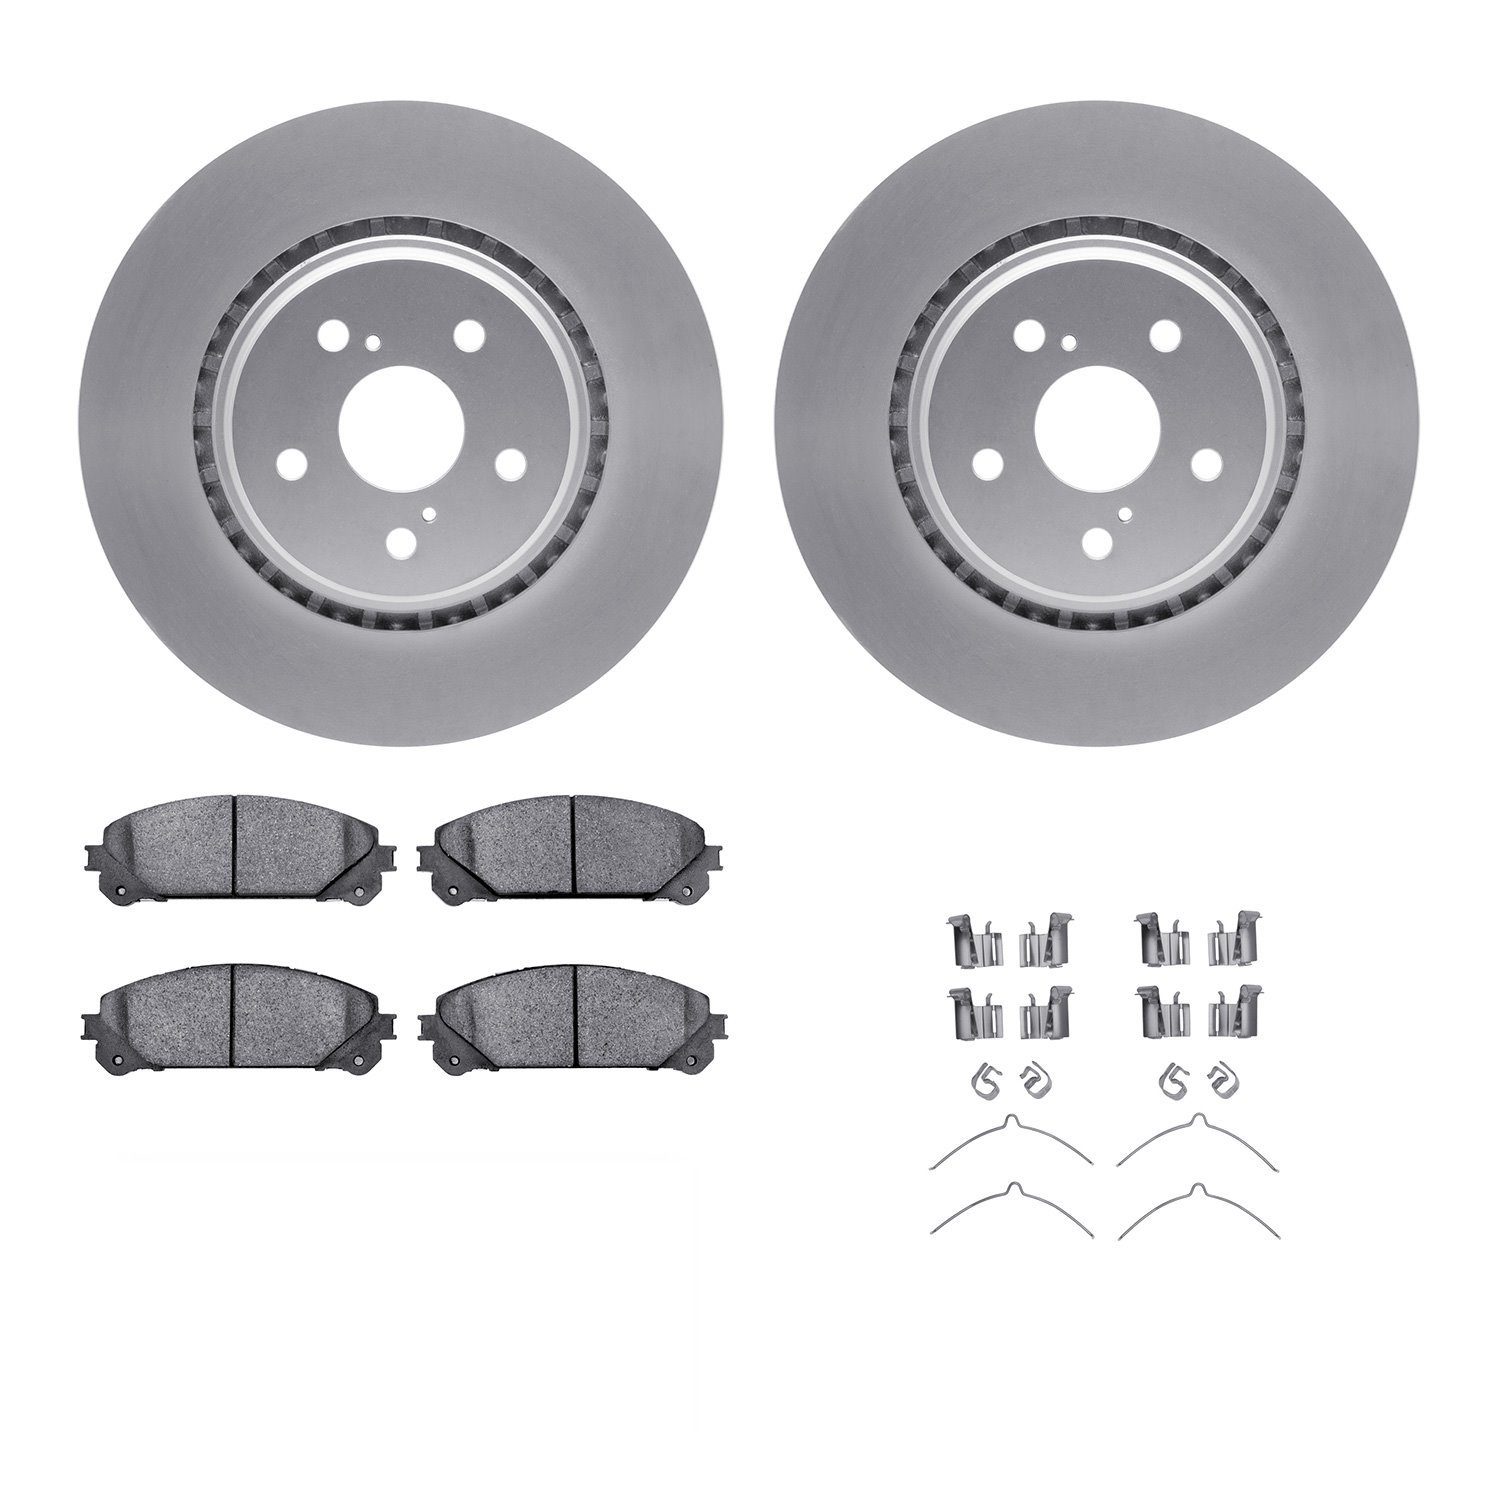 4312-75024 Geospec Brake Rotors with 3000-Series Ceramic Brake Pads & Hardware, Fits Select Lexus/Toyota/Scion, Position: Front